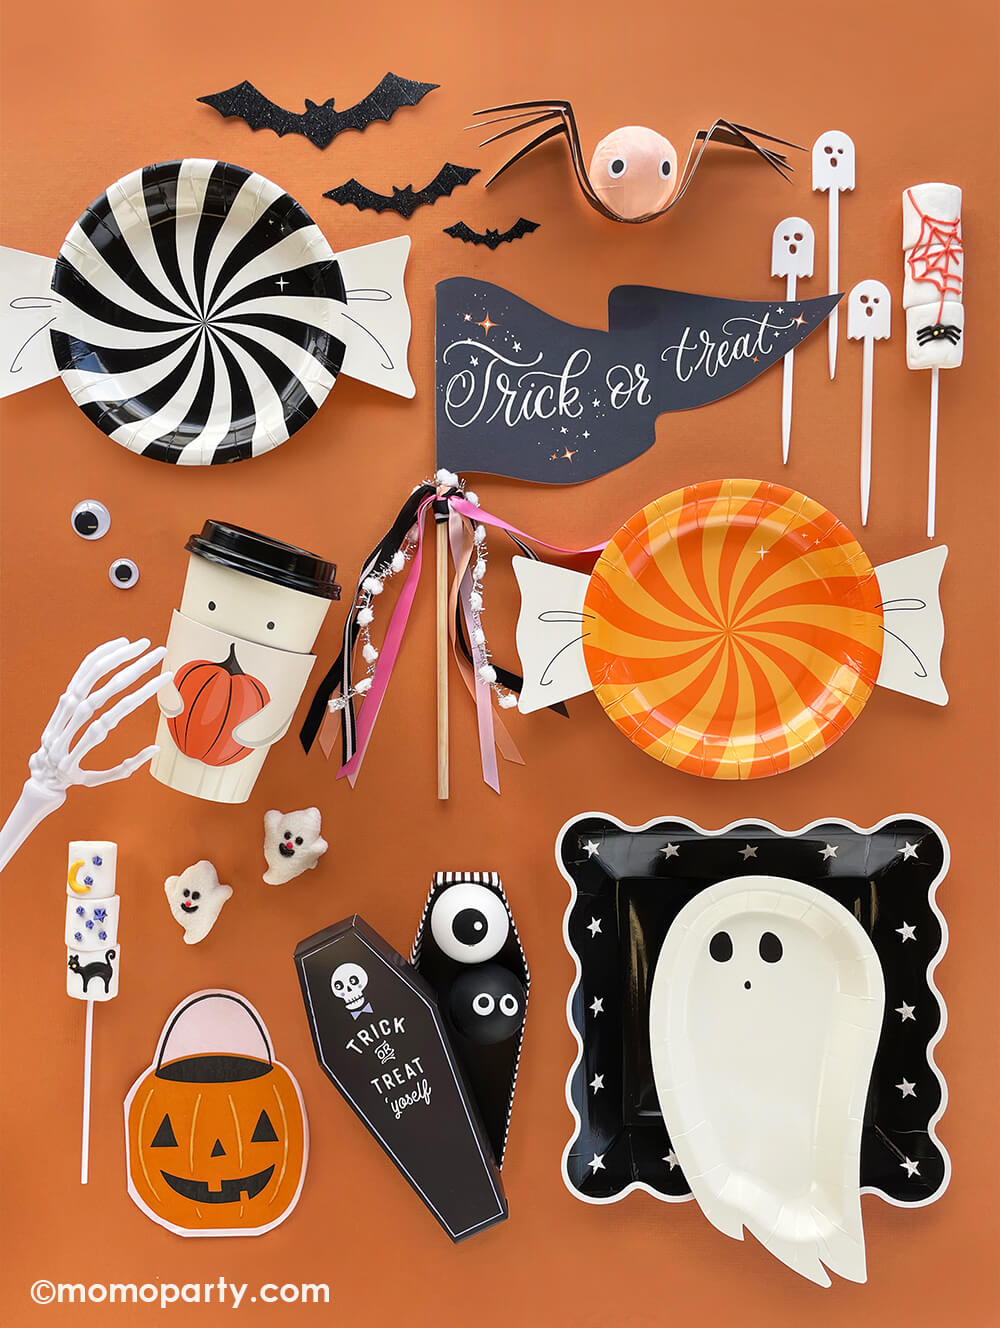 Kids Halloween Party Ideas consist of a table filled with modern and fun Halloween themed party supplies including ghost shaped plates, a trick or treat party pennant, ghost shaped acrylic stirrers, ghost shaped marshmallow, pumpkin bucket napkins, trick or treat candy shaped plates and bat decorations, all ready for a spooky fun night this Halloween!